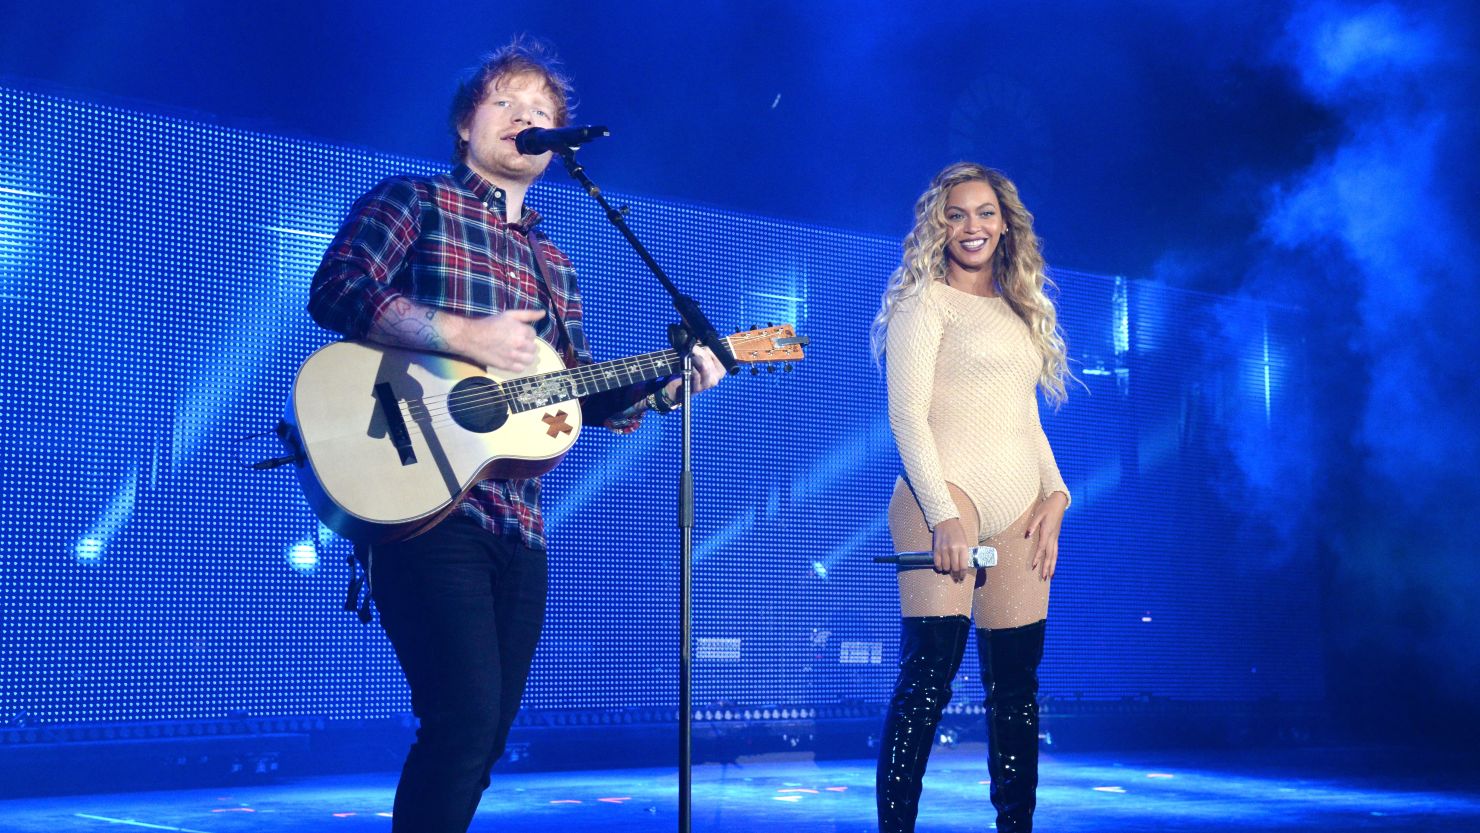 Ed Sheeran and Beyoncé during 2015 Global Citizen Festival to end extreme poverty by 2030. 